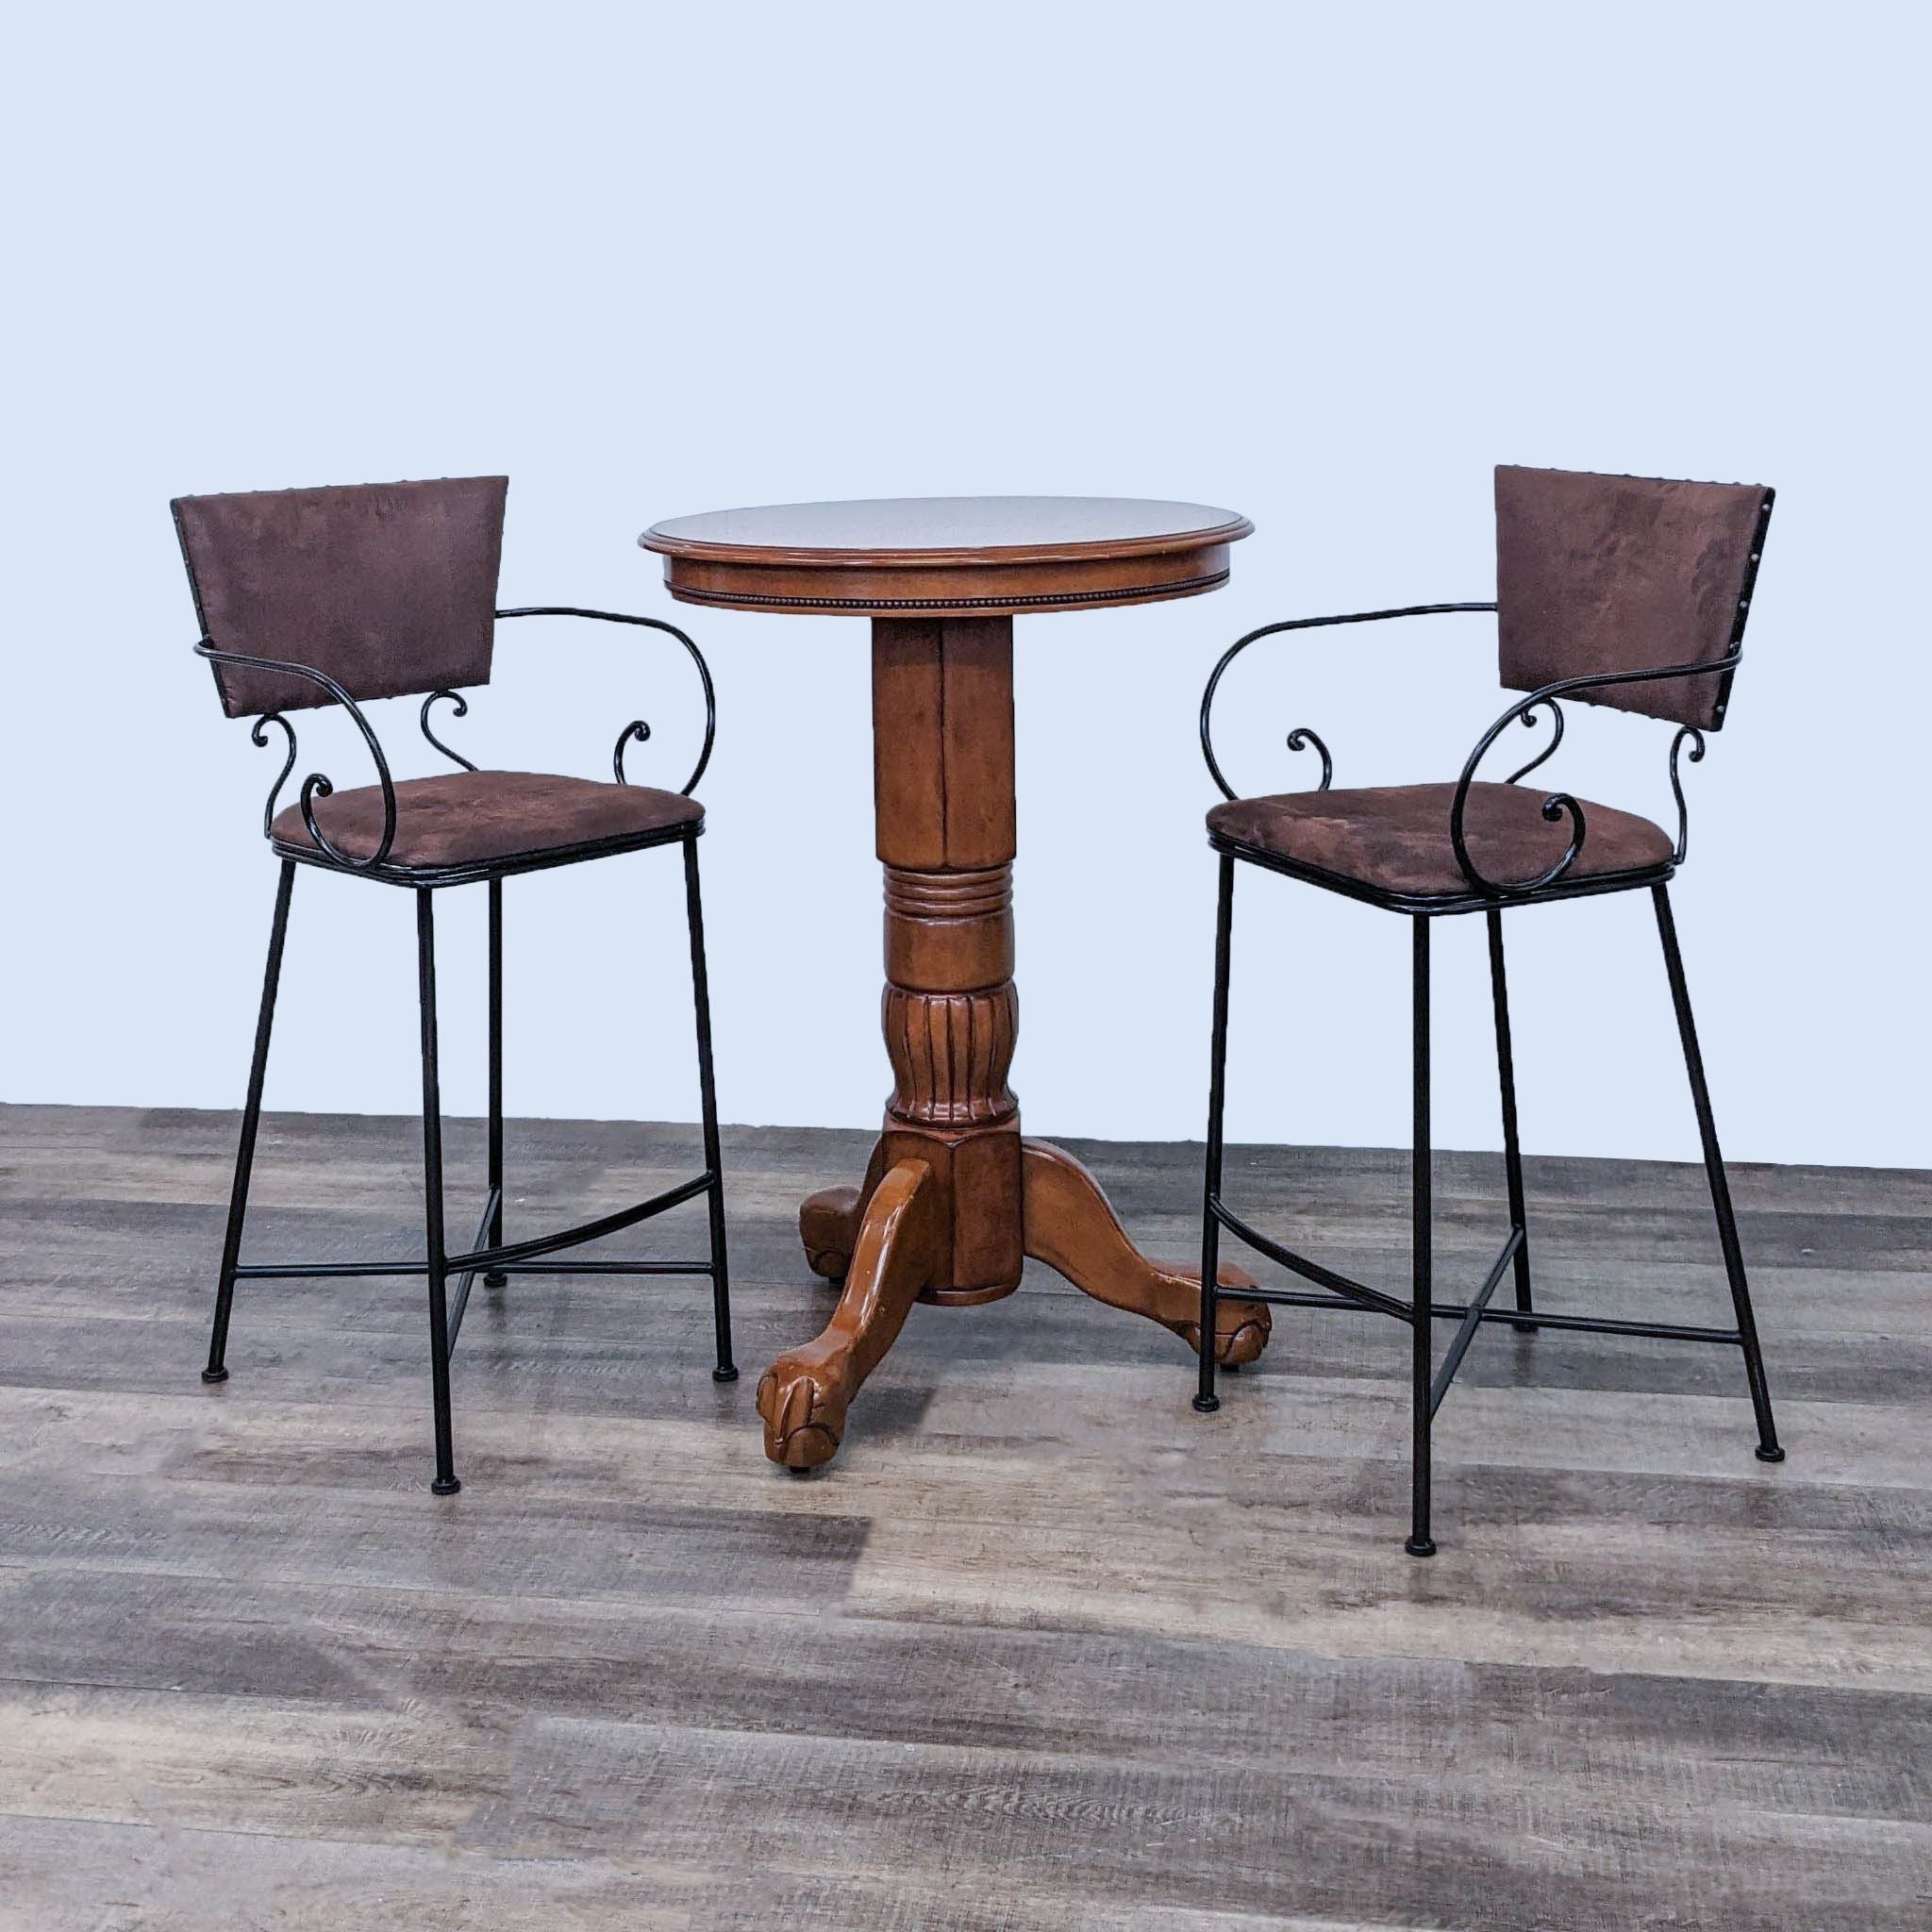 Pier 1 Imports dining set with two metal upholstered Chesington stools and a round wooden pedestal table.